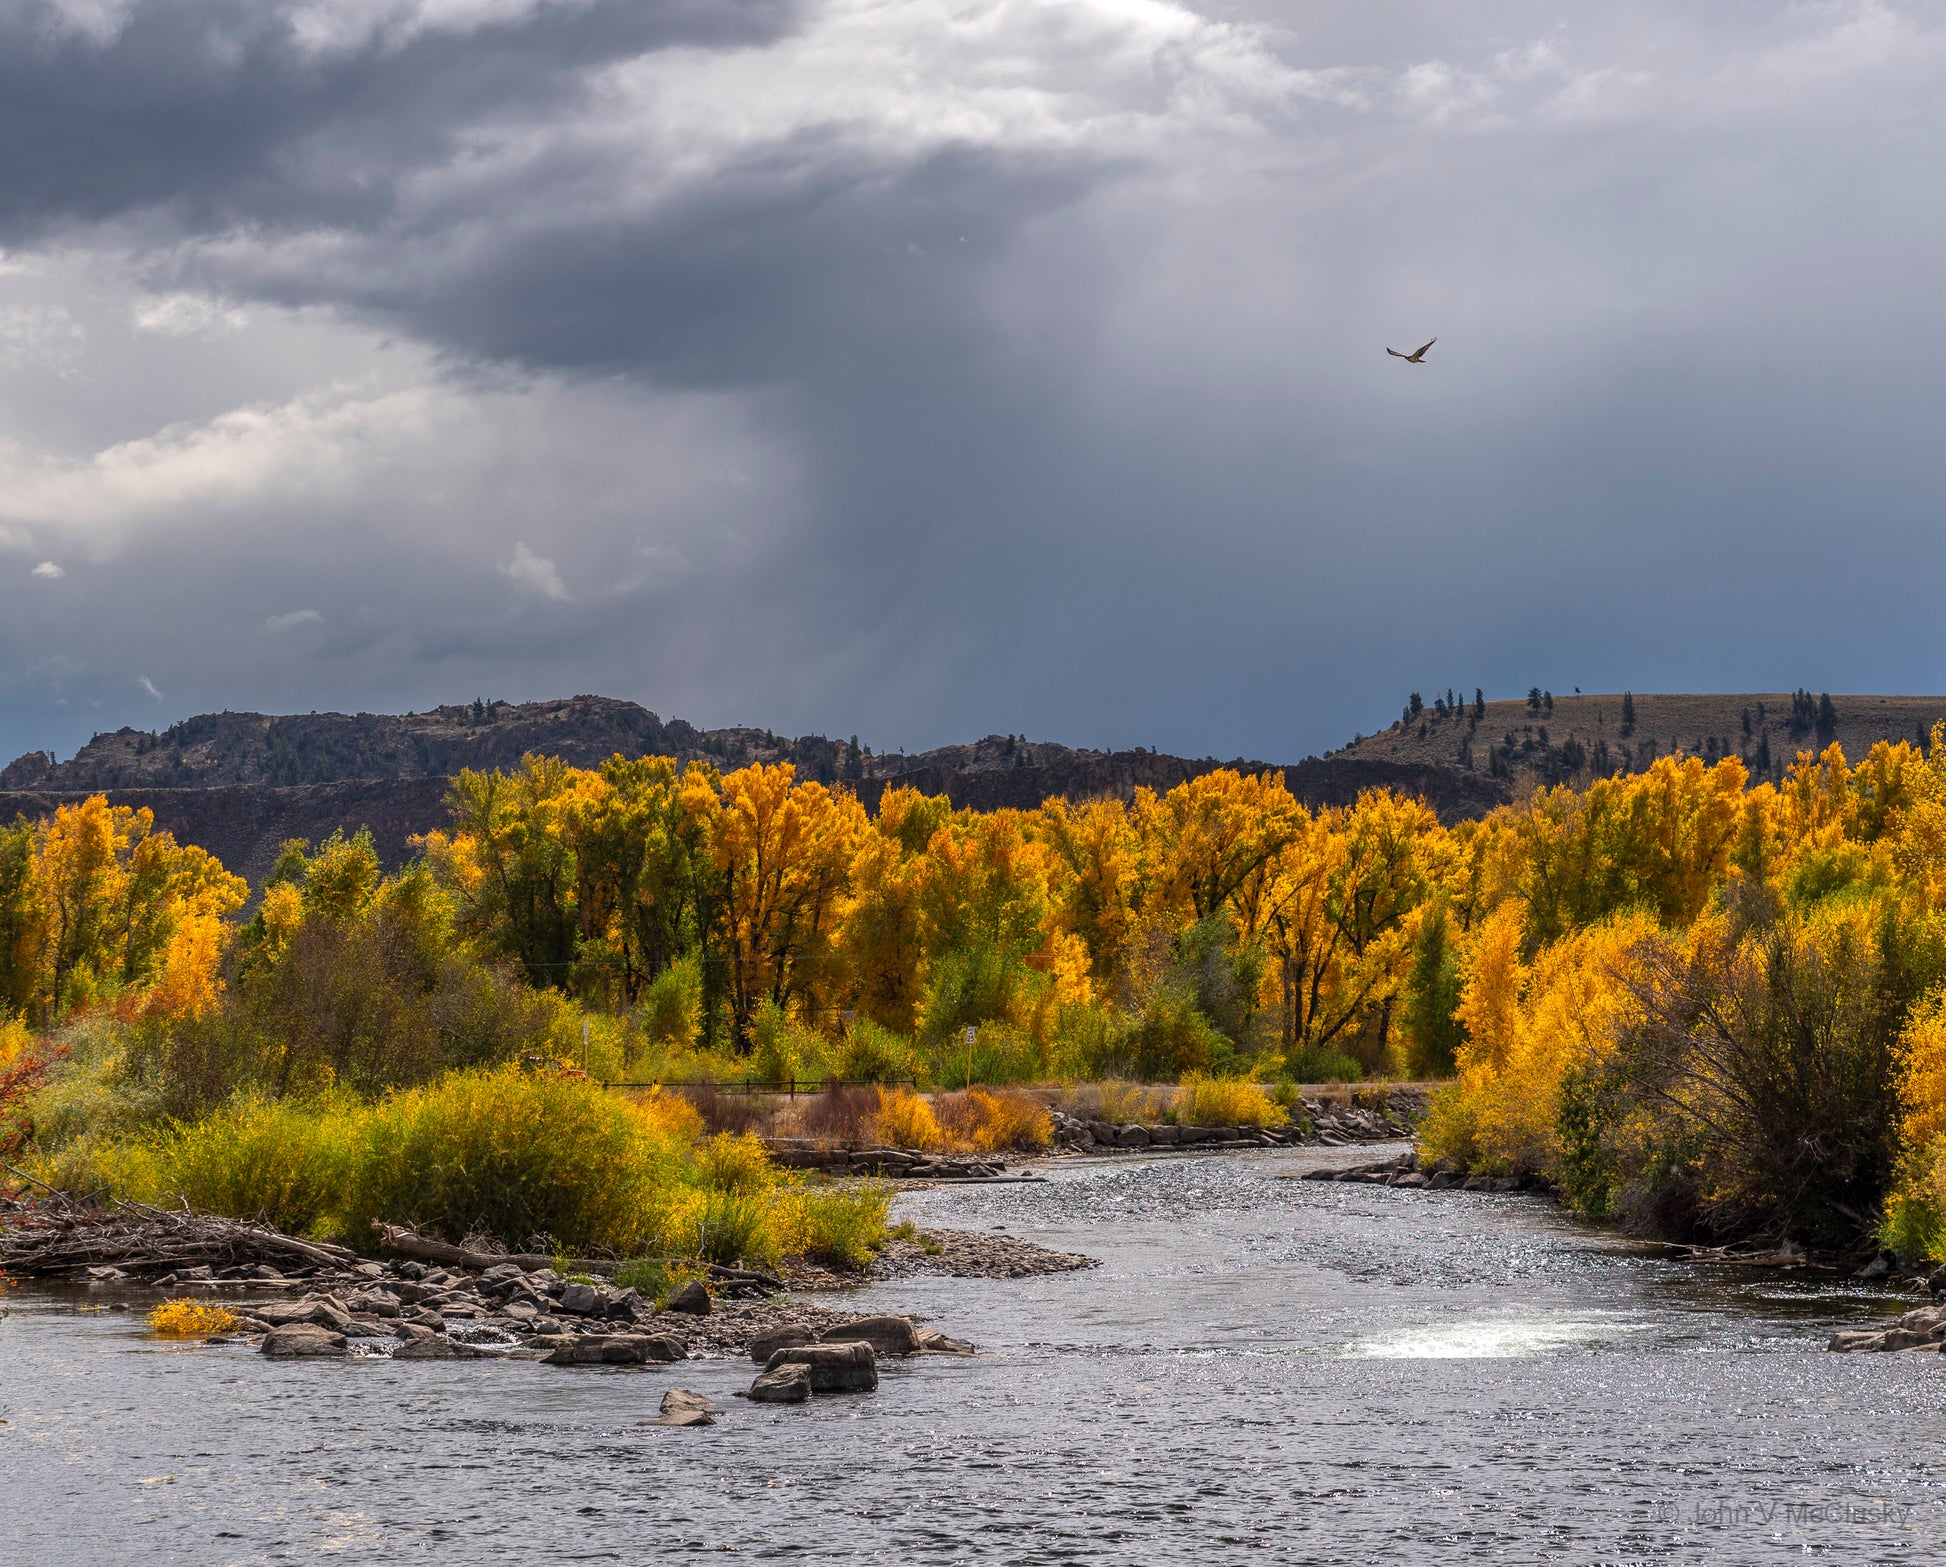 In this fine art landscape photograph, sunlit golden cottonwood trees line the Arkansas river, but threatening clouds loom on the horizon.  A hawk floats above, observing all.